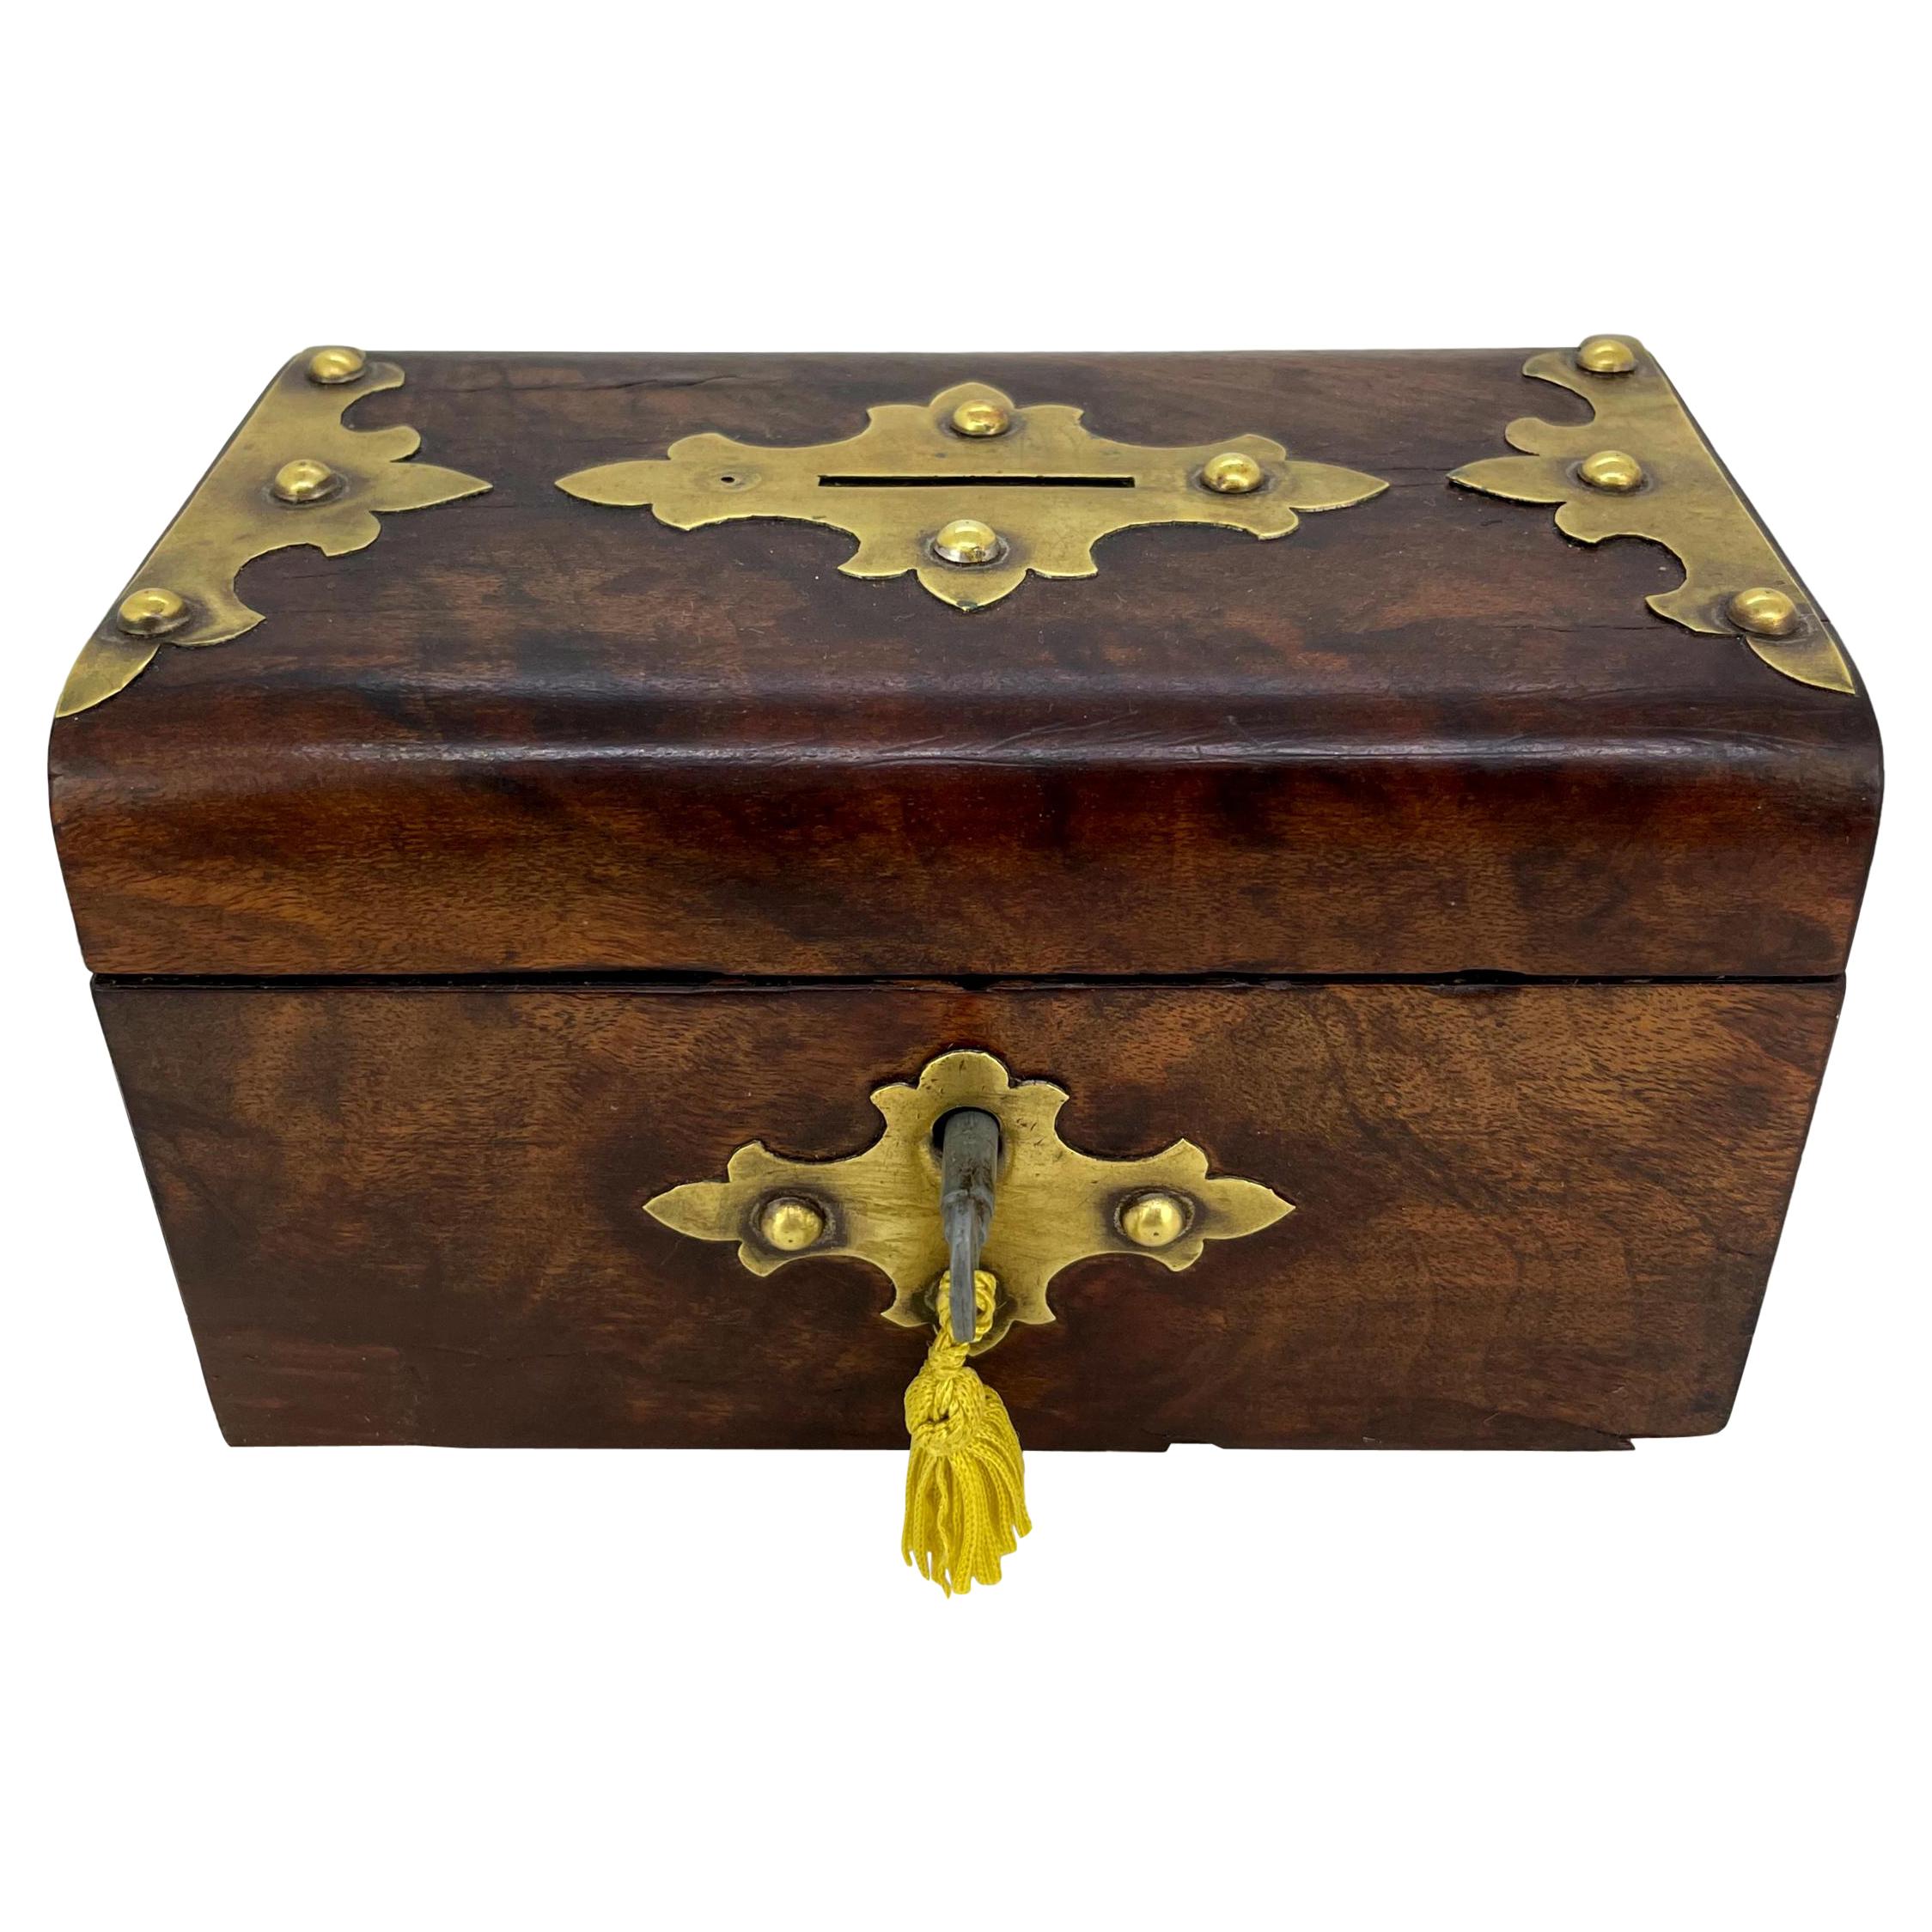 Burl Walnut and Brass Embellished Money Box, English, ca. 1860 For Sale